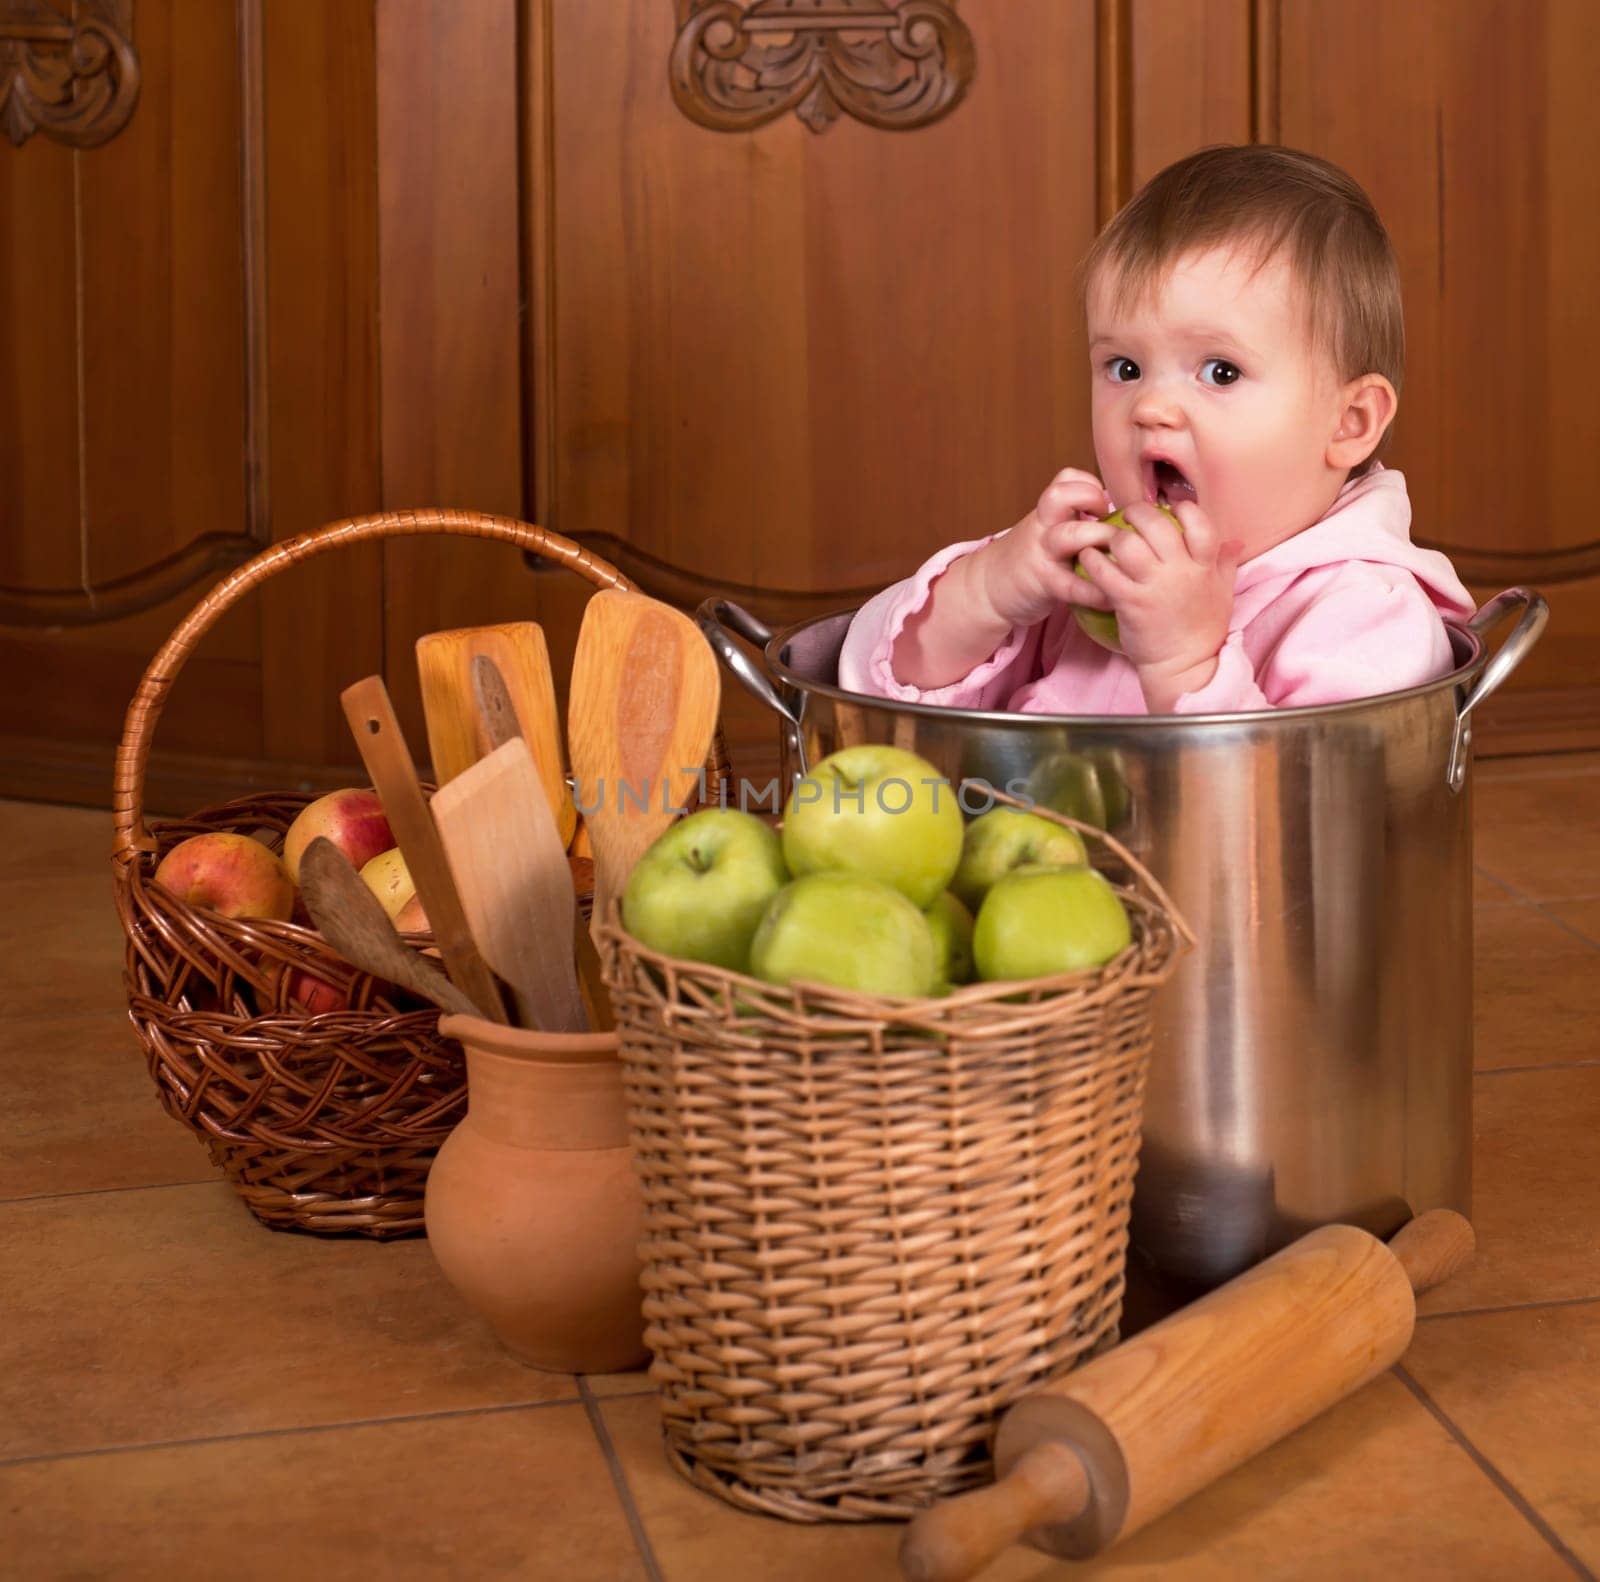 Portrait of a smiling baby sitting inside a large cooking stock pot surrounded by vegetables and food